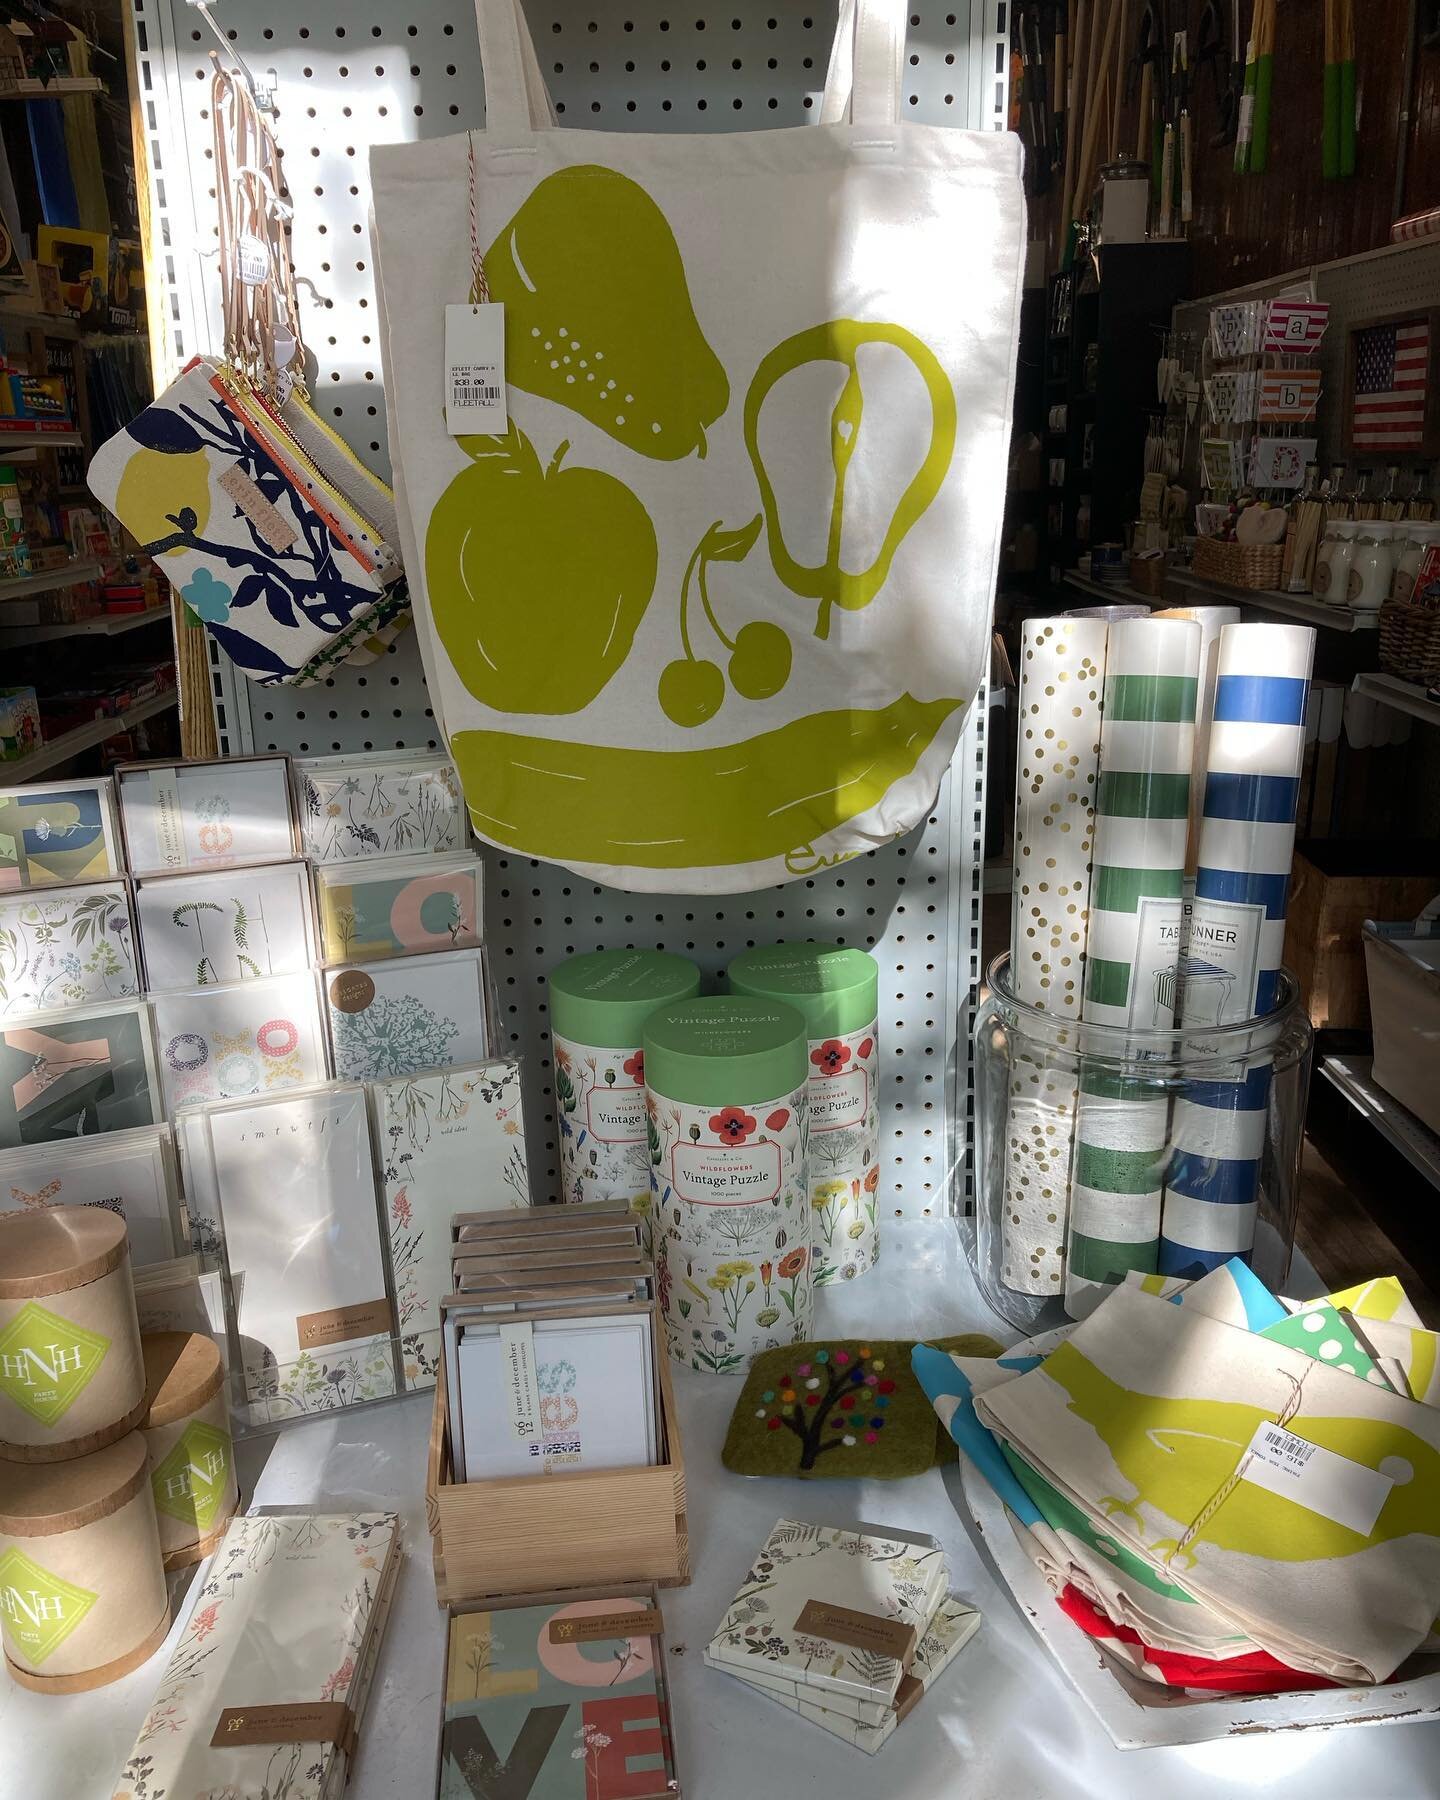 Gifts for mom at the ready:
New Erin Flett bags, custom 18940 &amp; Bucks County candles, cookies, &amp; more. Free cookie samples every Saturday in May! Brave the weather and stop in to see us. 🙂